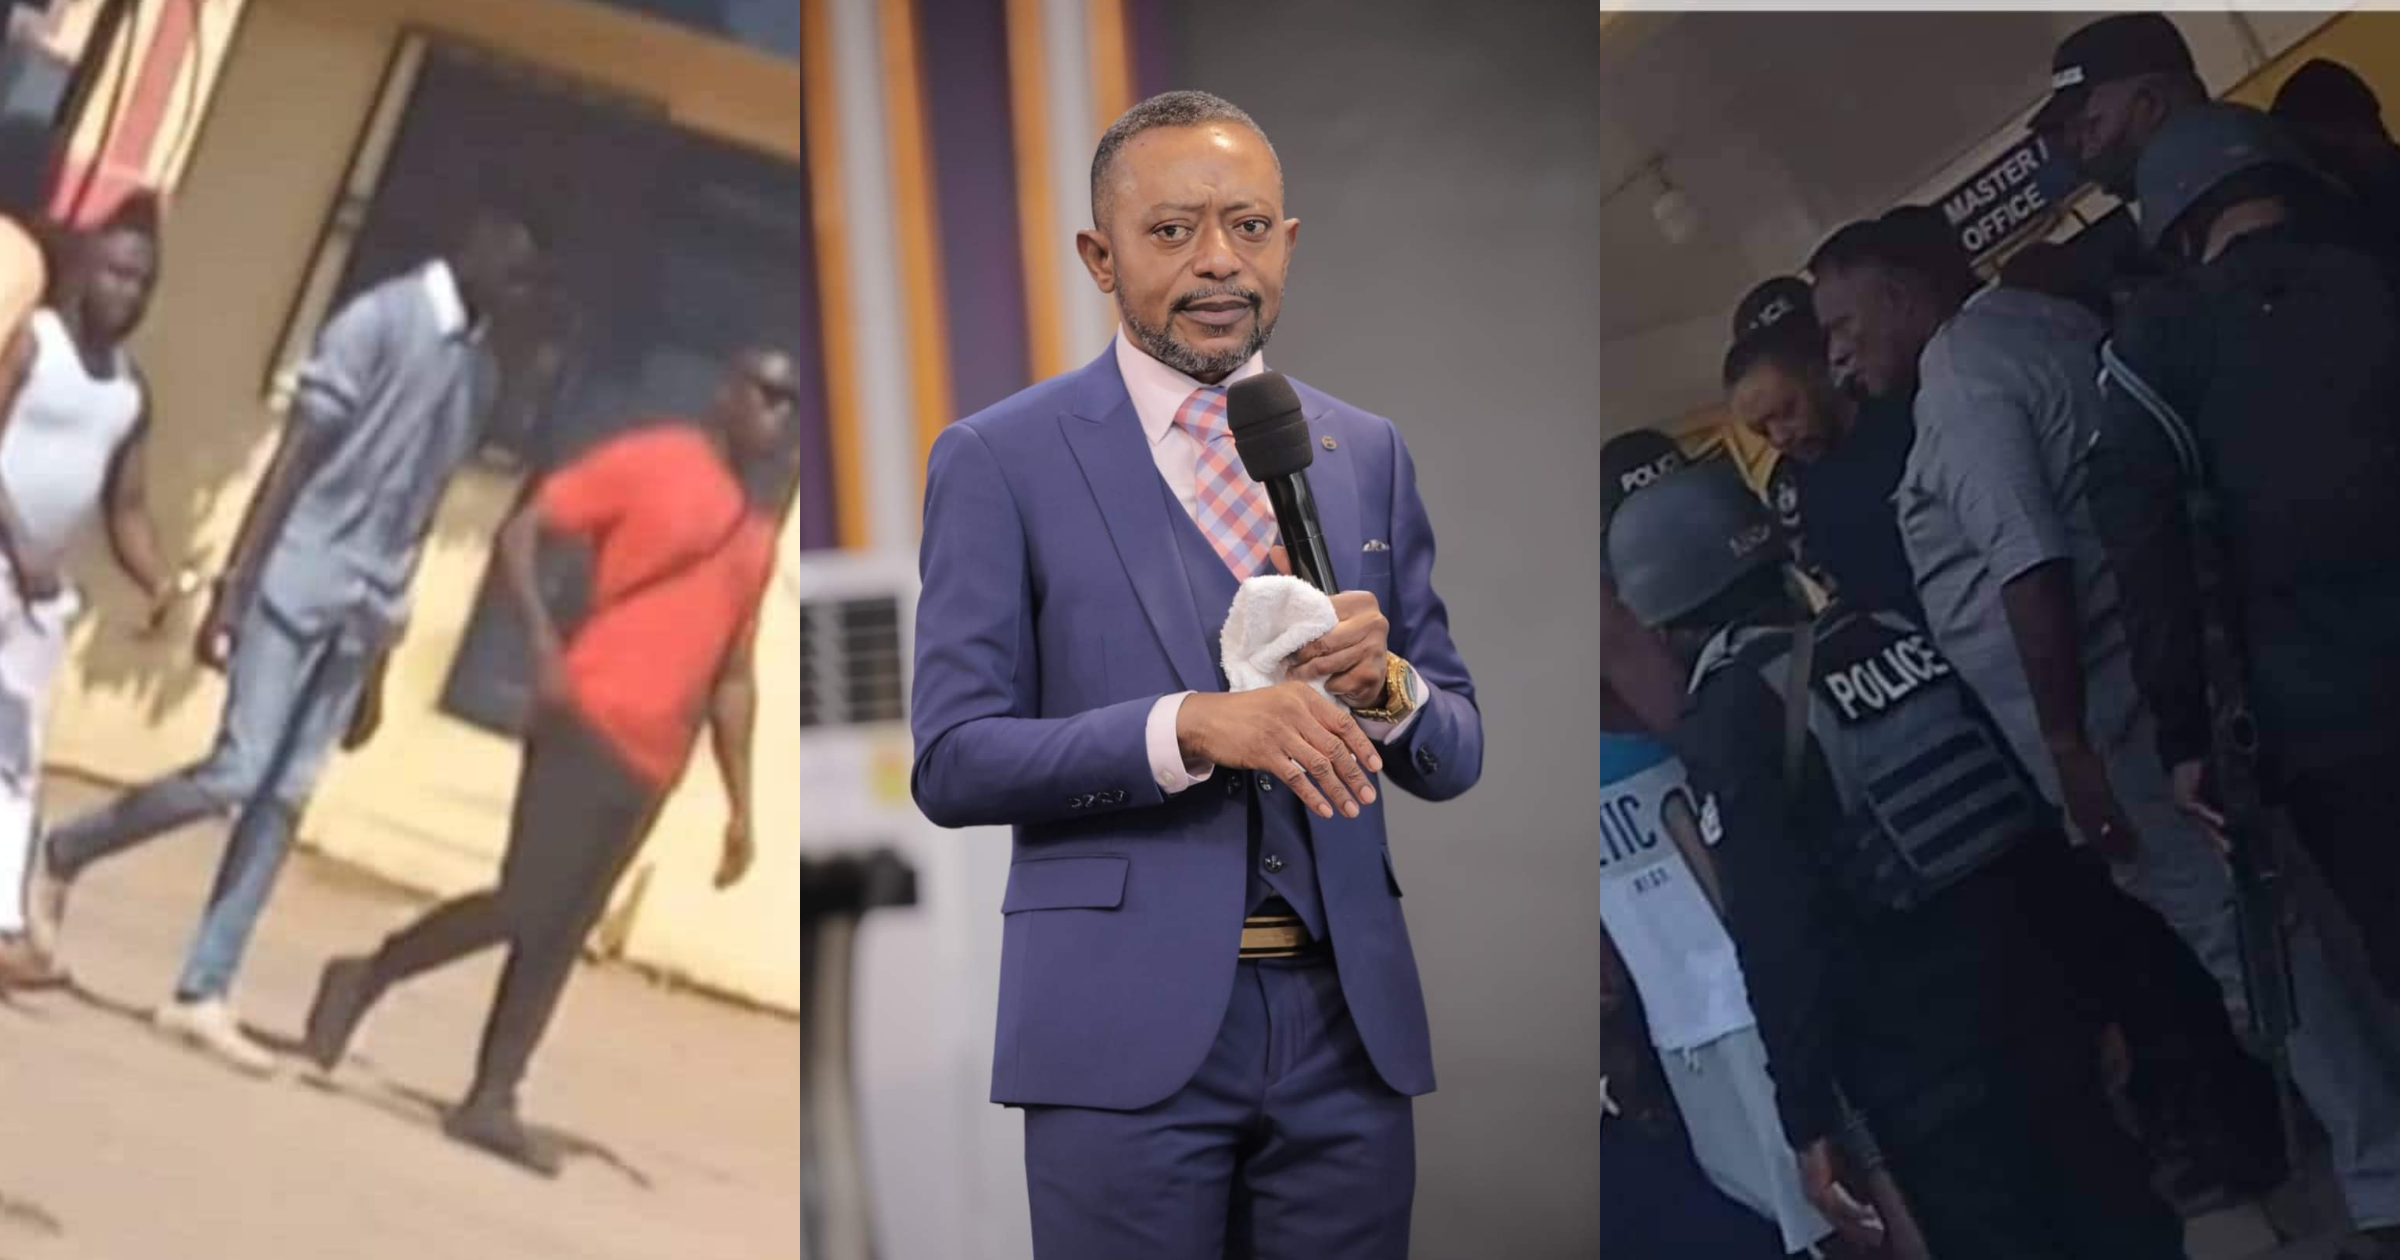 Owusu Bempah ordered his church members to assault police officers - New details of arrest emerge